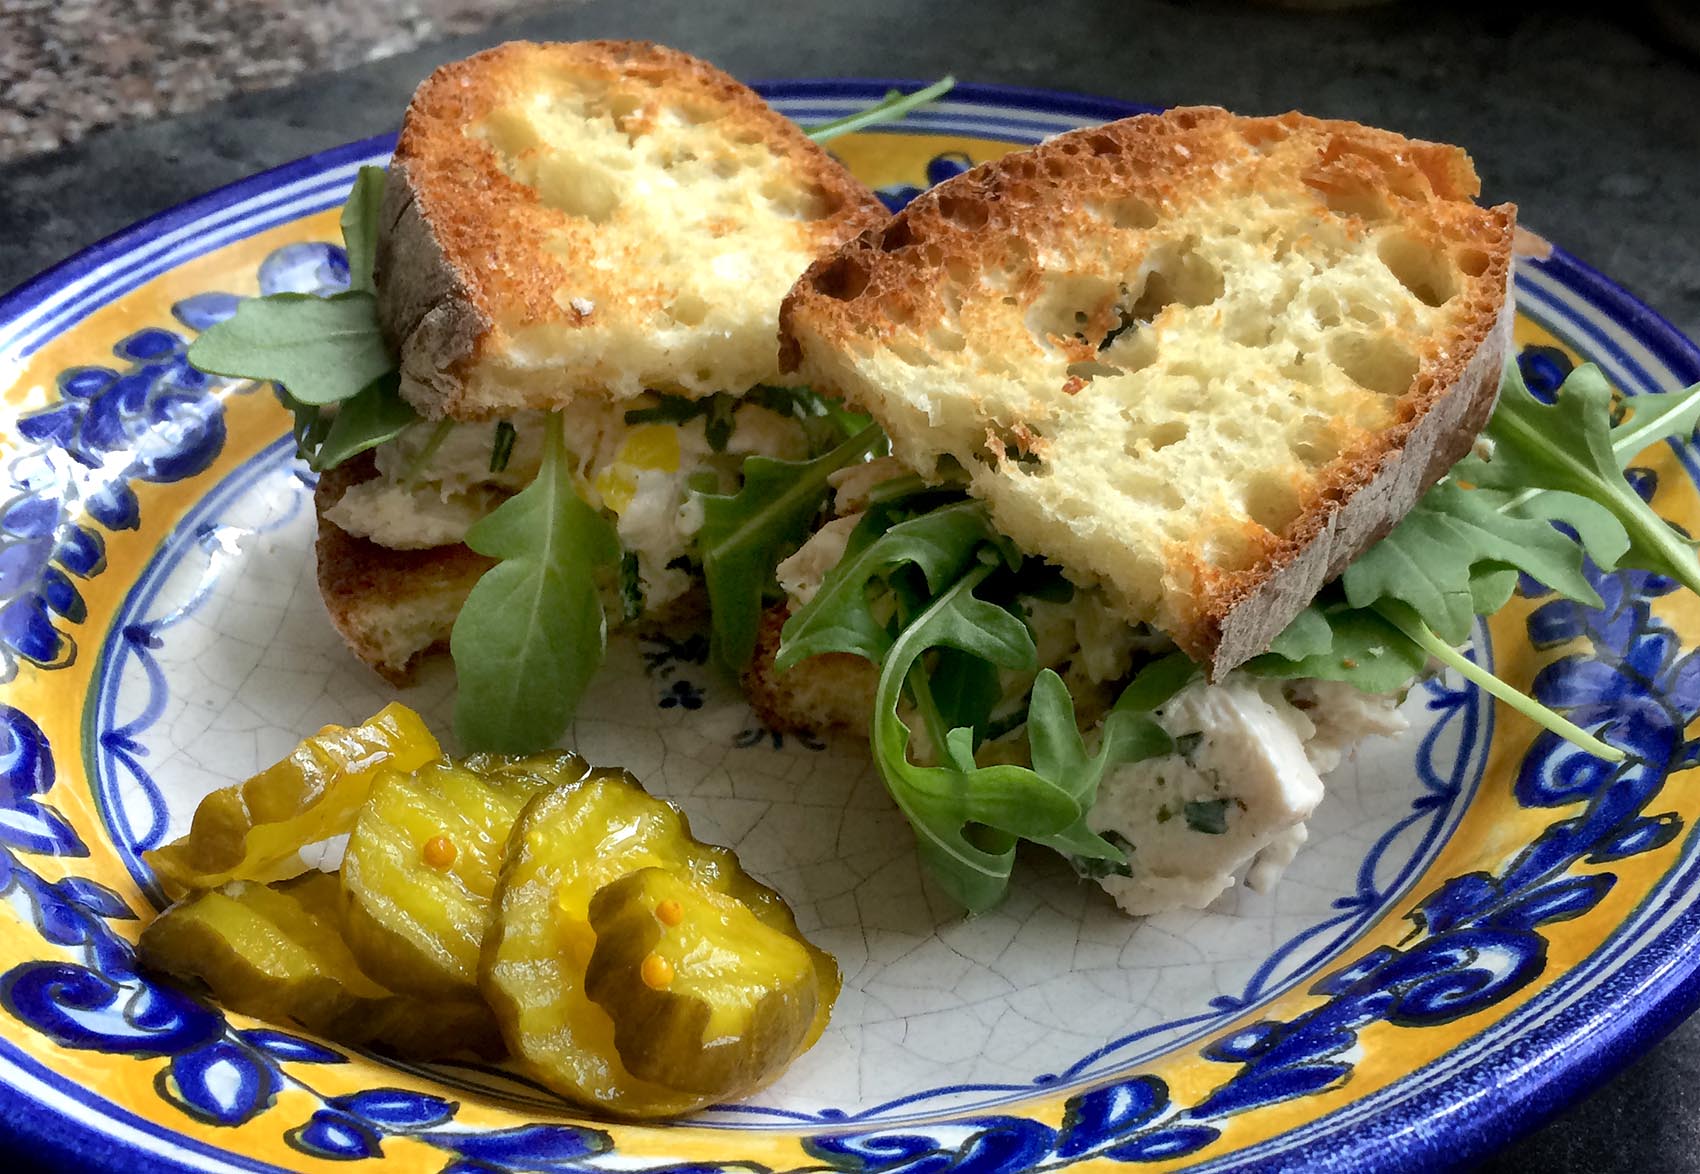 Kathy's chicken salad sandwich with arugula and pickles. (Kathy Gunst for Here &amp; Now)